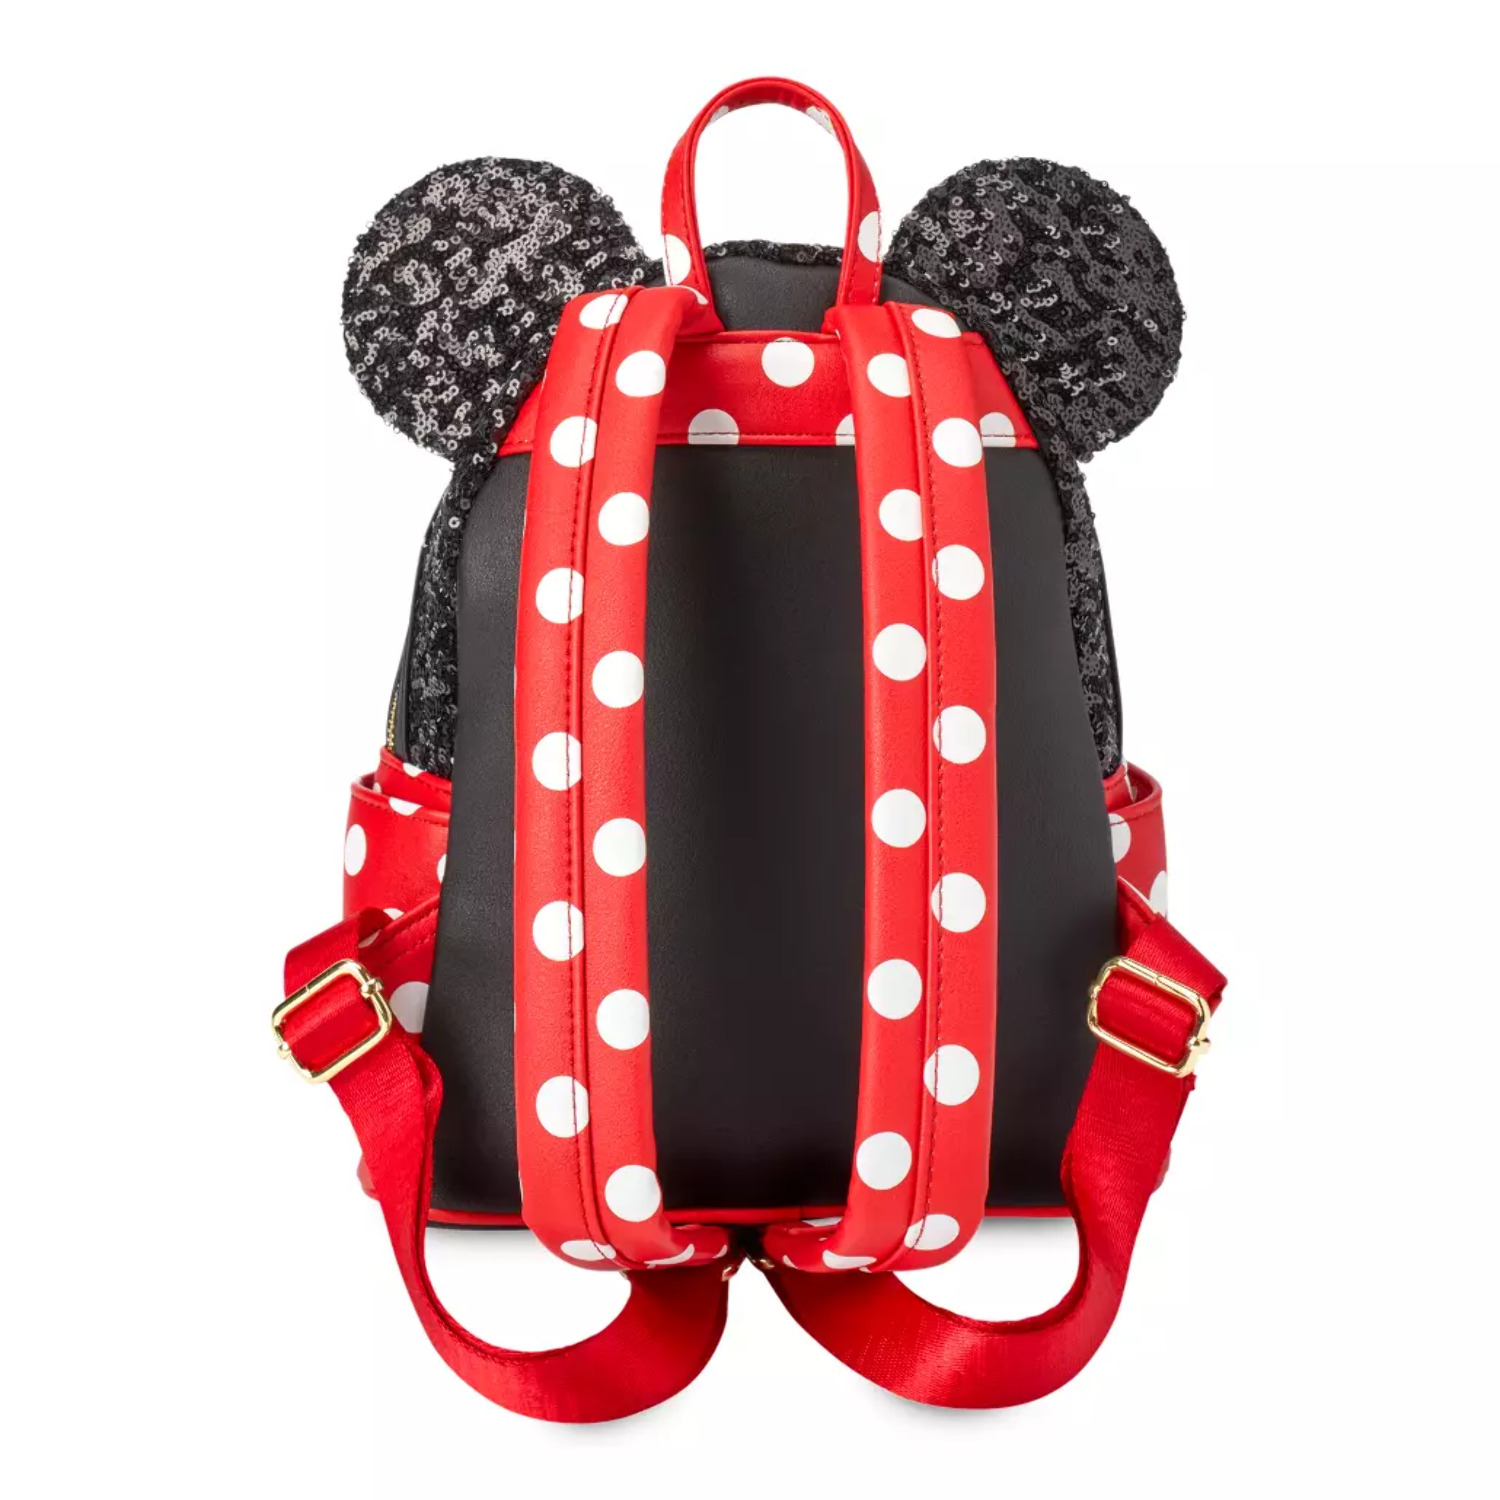 Disney Parks Minnie Sequin And Polka Dot Mini Backpack New With Tag - image 4 of 4